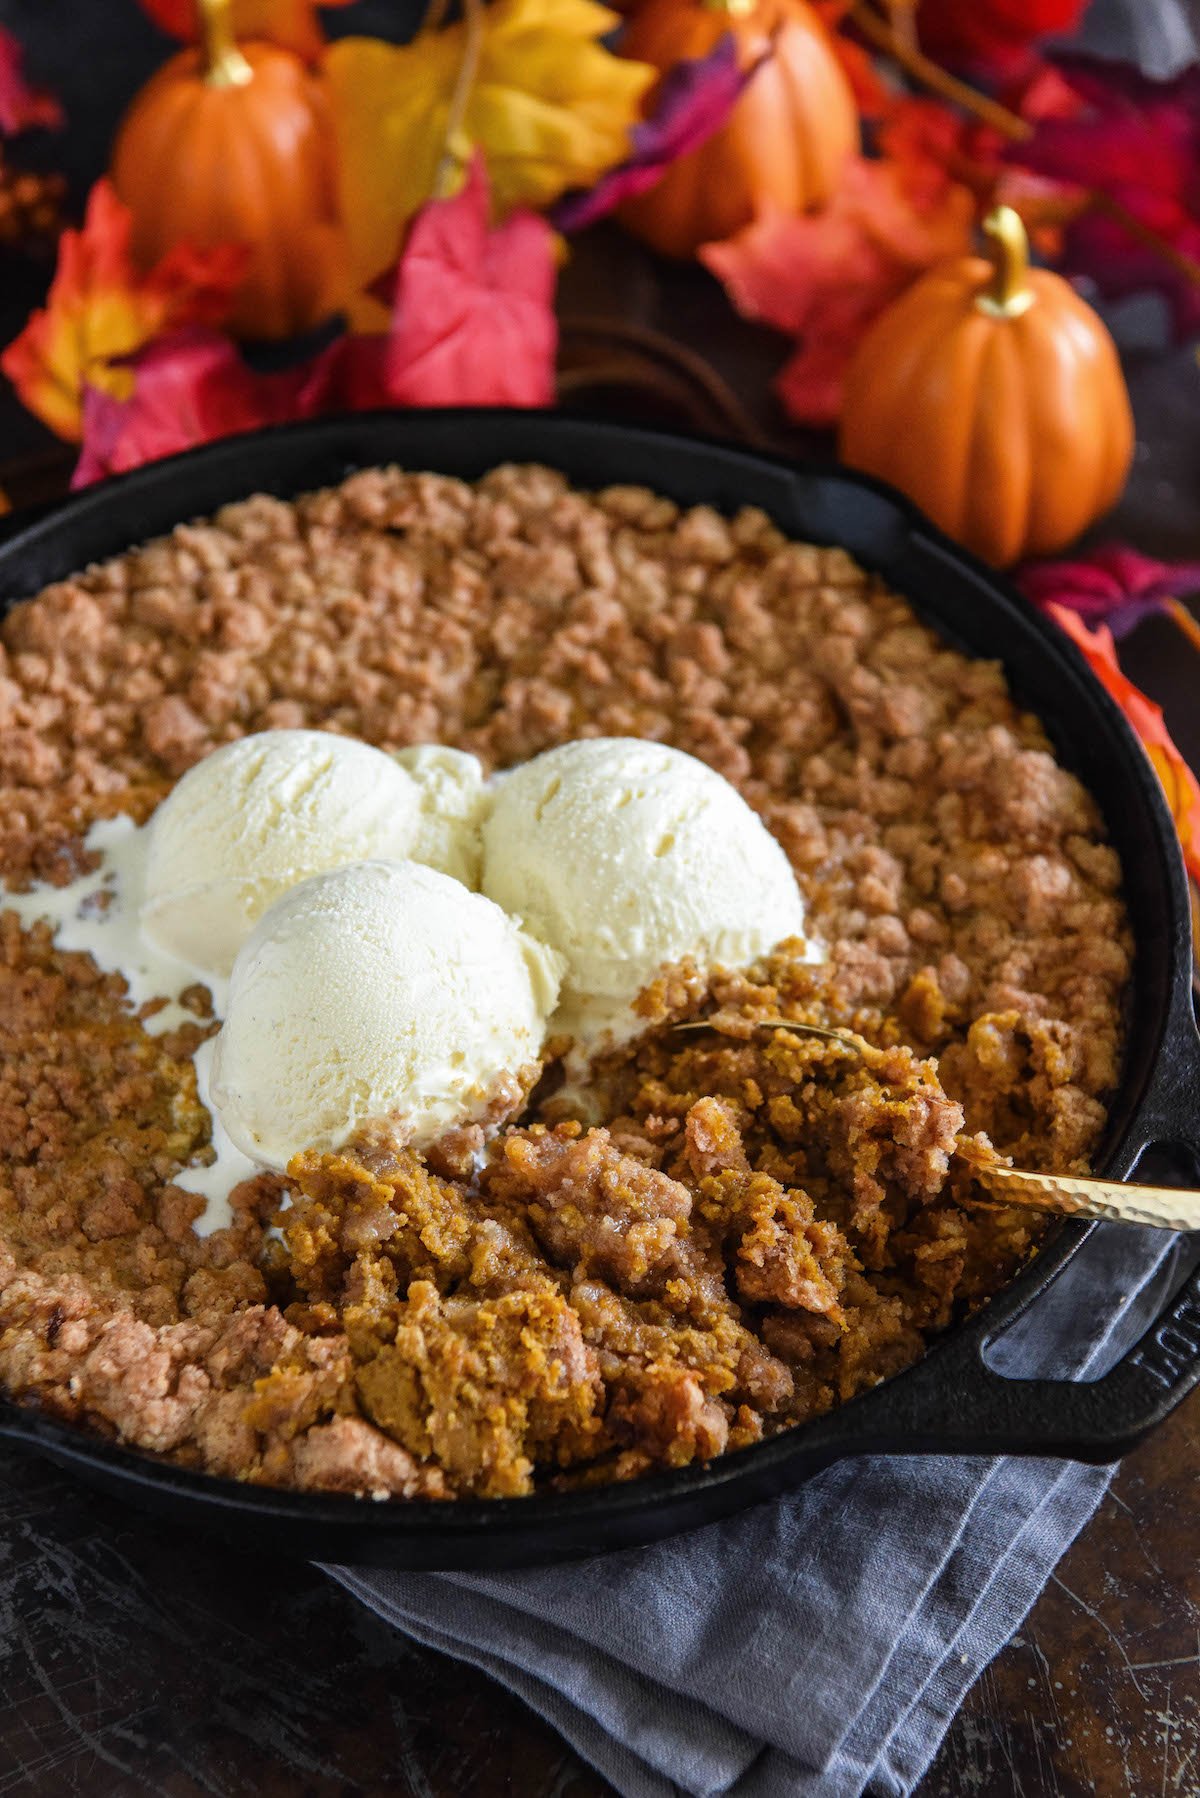 A spoon scooping up pumpkin crisp from a cast iron skillet.